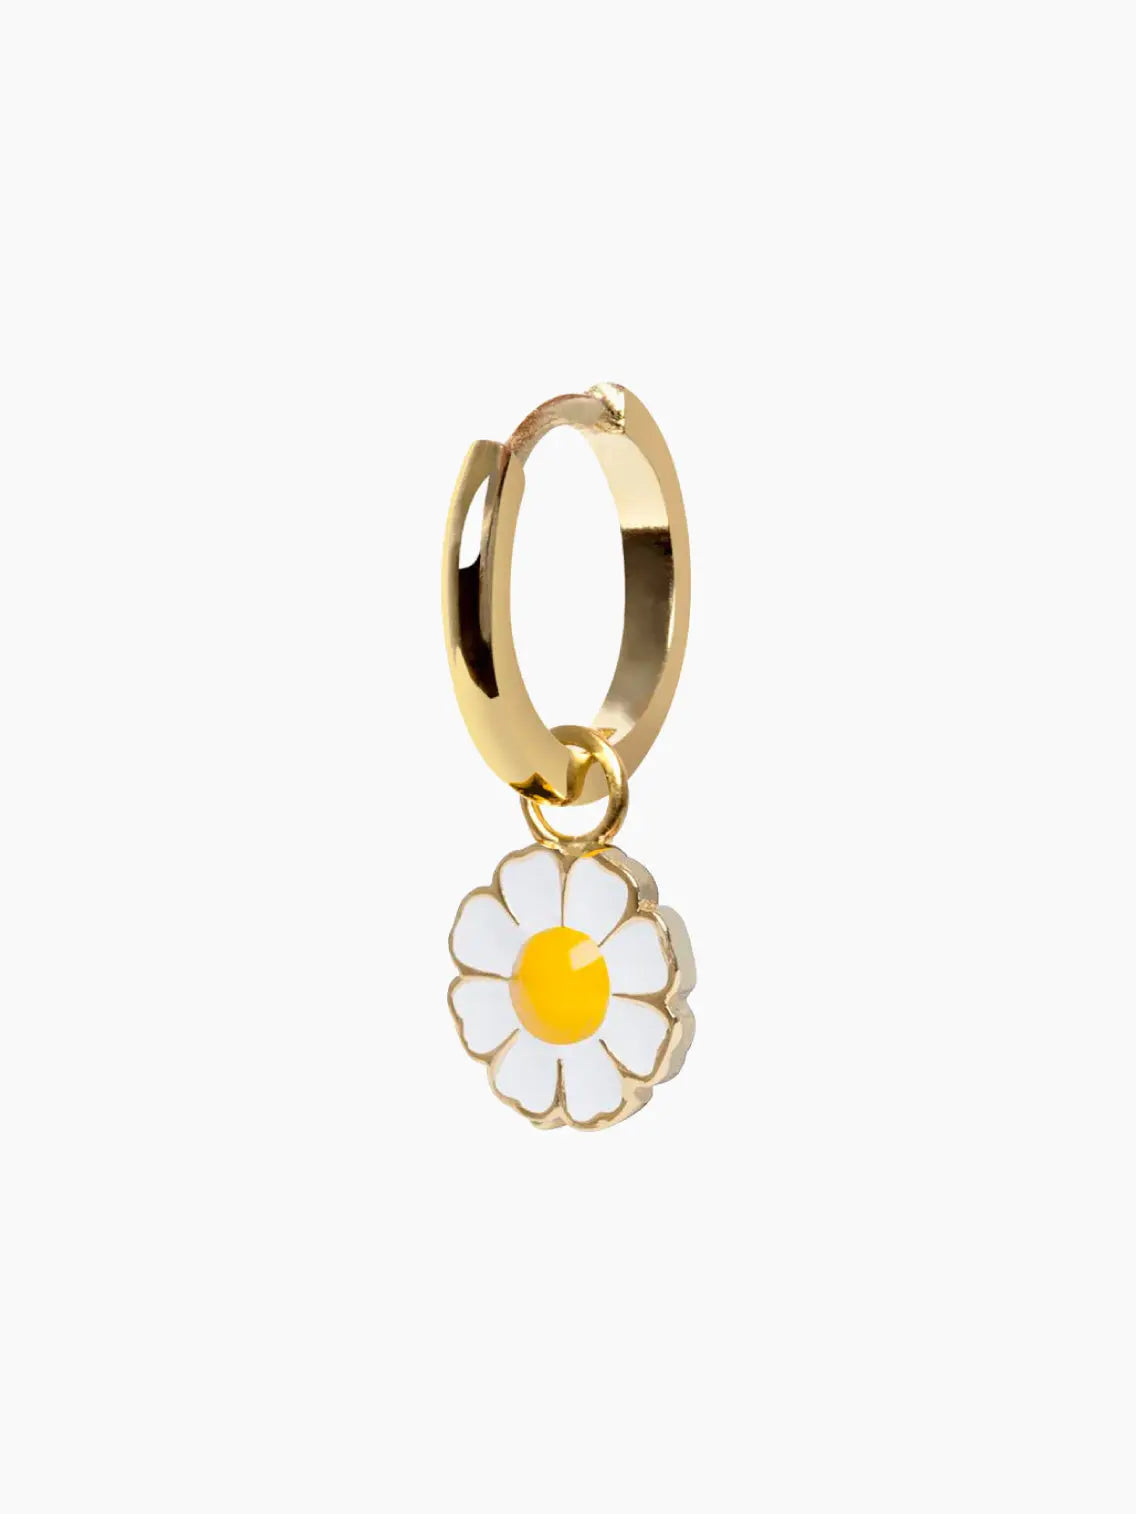 A Gold Daisy Earring with a small white and yellow daisy charm hanging from the bottom. The daisy charm has white petals and a bright yellow center, embodying a delicate and cheerful style. Available exclusively at Bassalstore in Barcelona. The background is plain white.